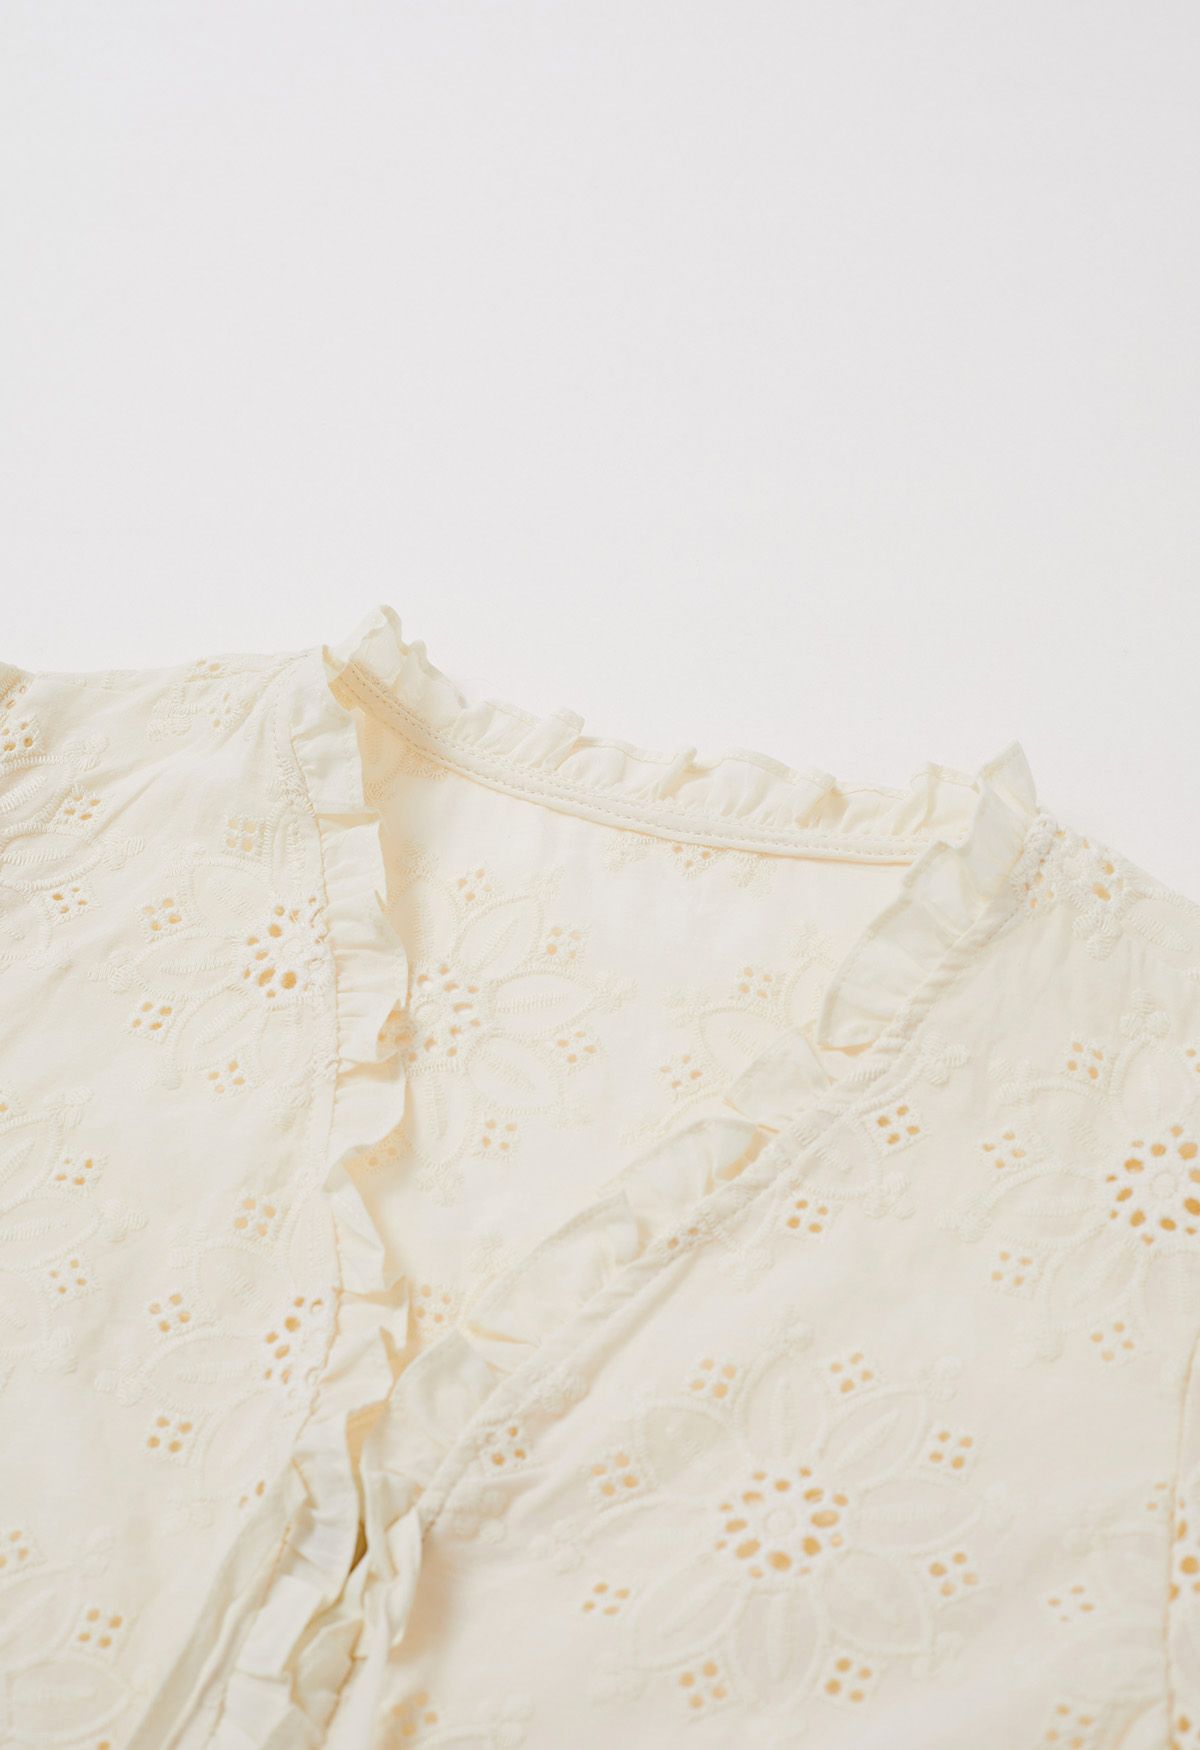 Sunflower Eyelet Embroidered Puff Sleeve Top and Pants Set in Cream